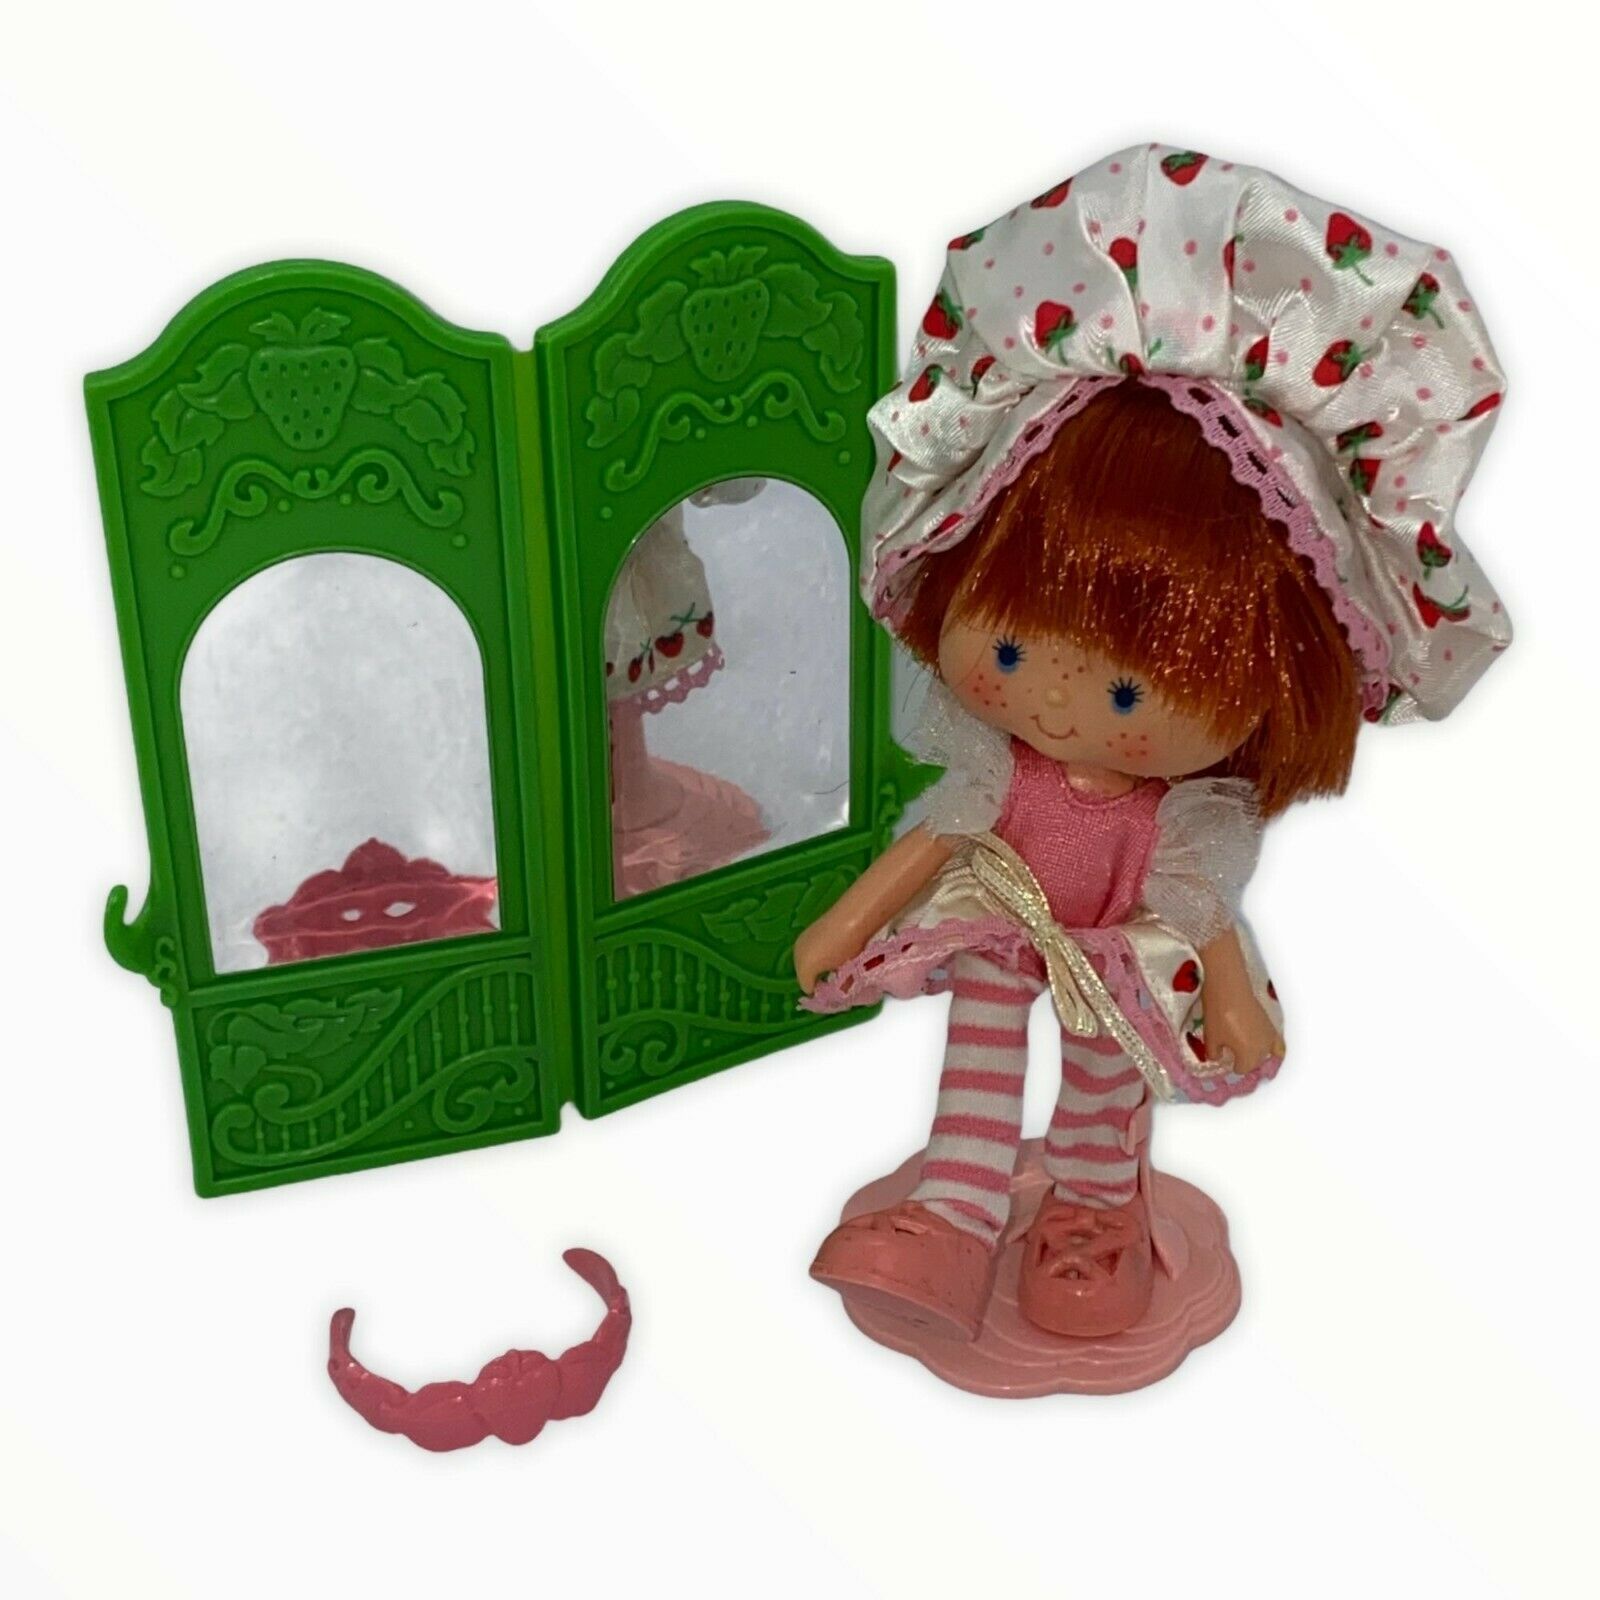 Primary image for Dancin' Strawberry Shortcake Doll Vintage Ballerina Dancer with Accessories